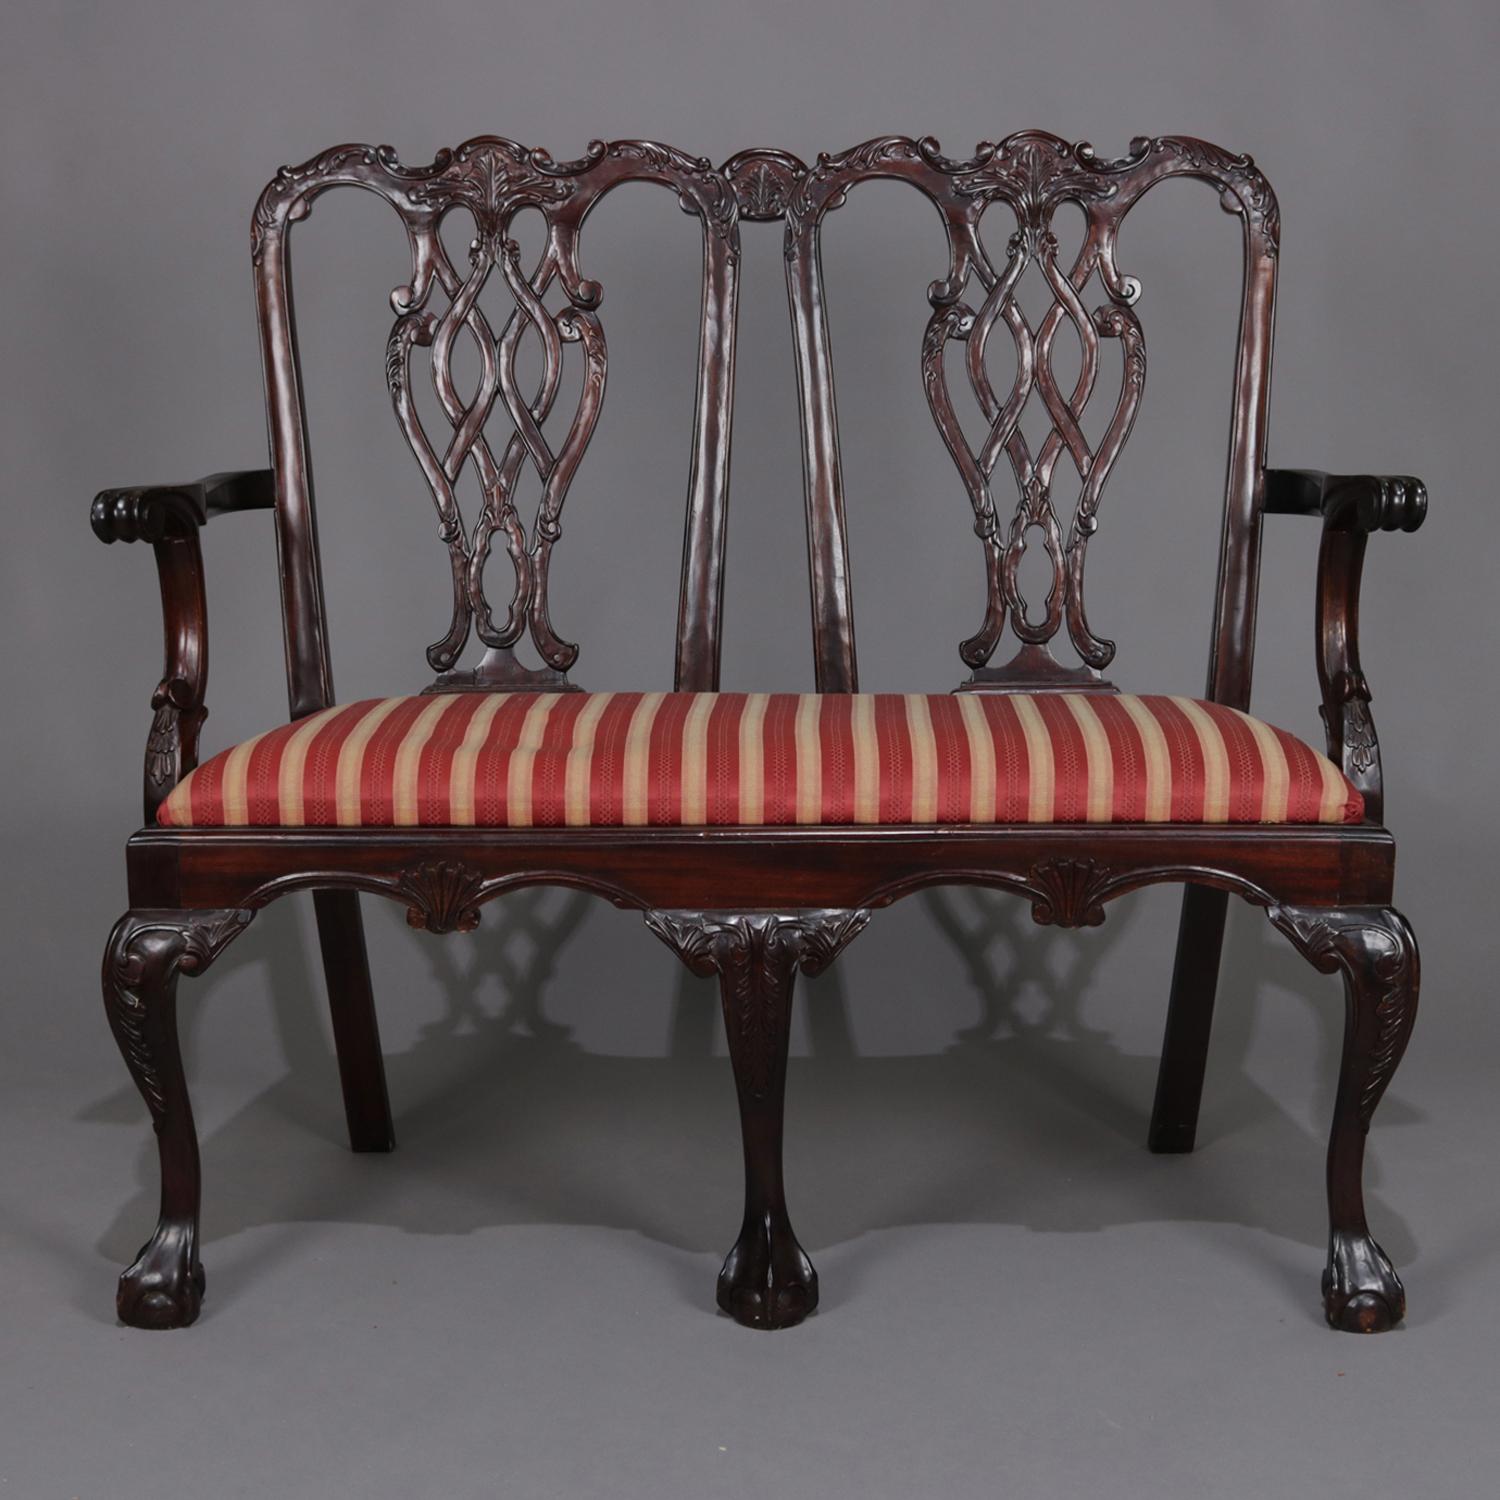 Chippendale style double chair settee features carved mahogany frame with ribbon back, scrolled arms, seated on claw and ball feet and with upholstered seat, 20th century

***DELIVERY NOTICE – Due to COVID-19 we are employing NO-CONTACT PRACTICES in